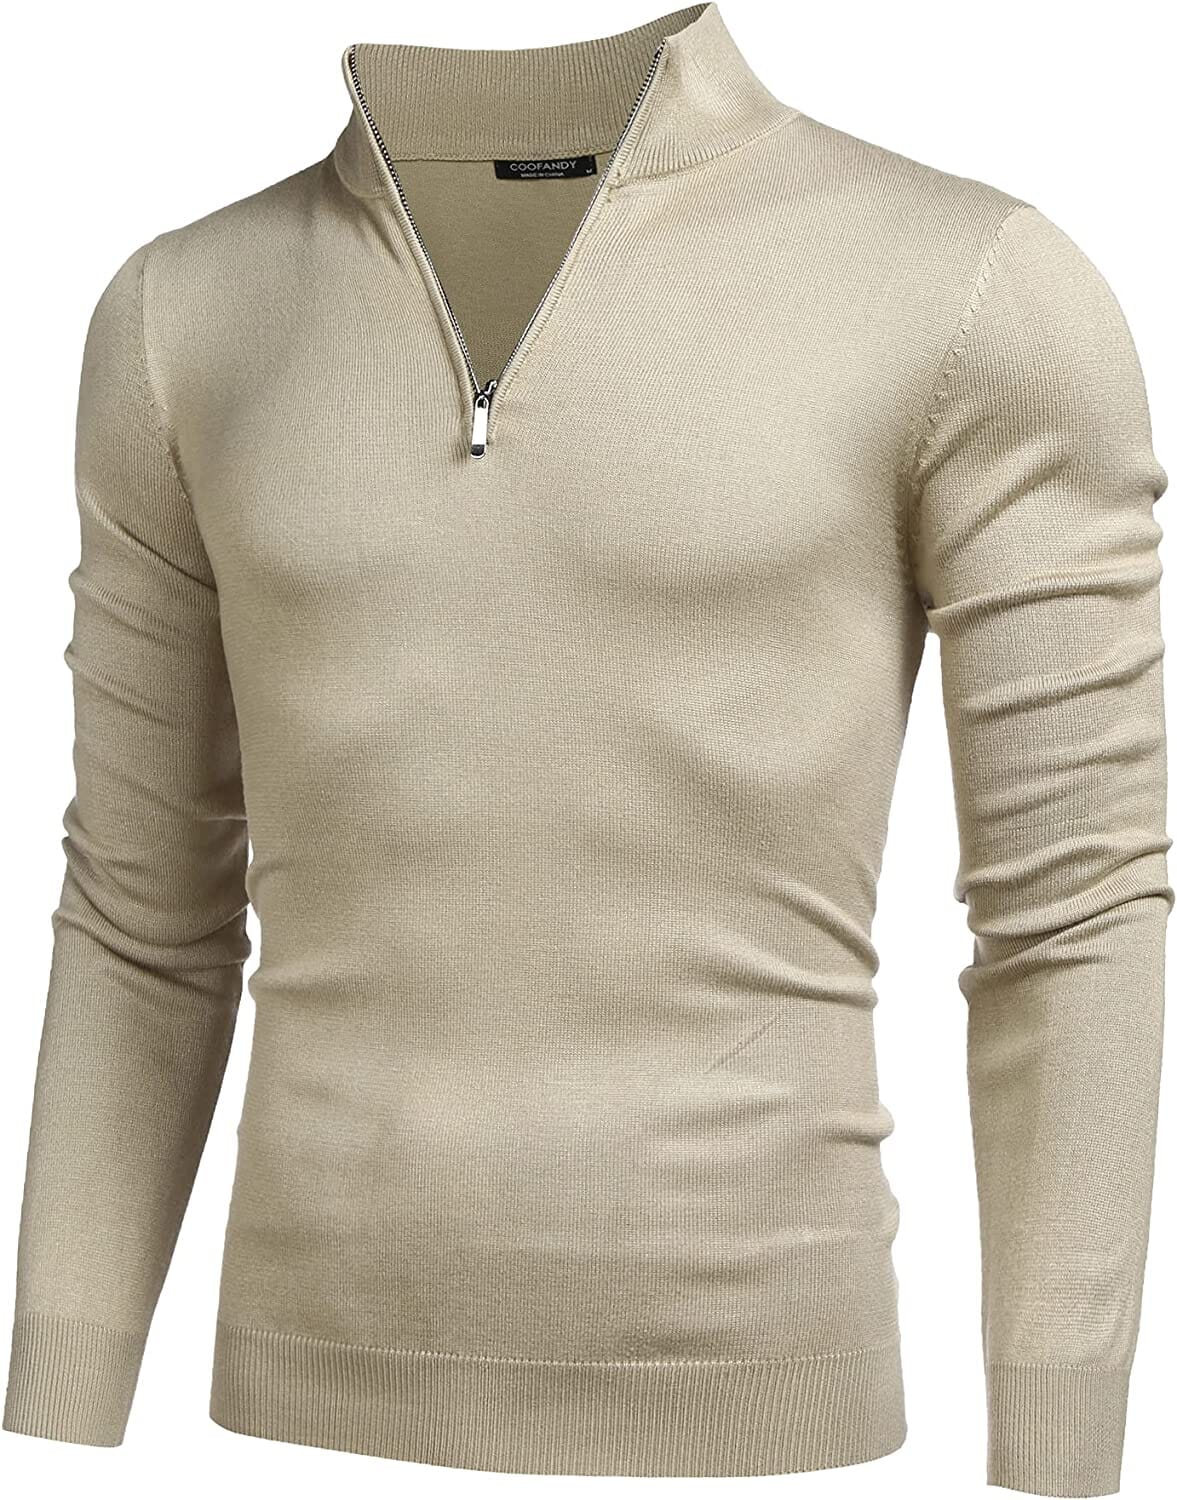 Zip Up Slim Fit Lightweight Pullover Polo Sweater (US Only) Fashion Hoodies & Sweatshirts COOFANDY Store Khaki S 